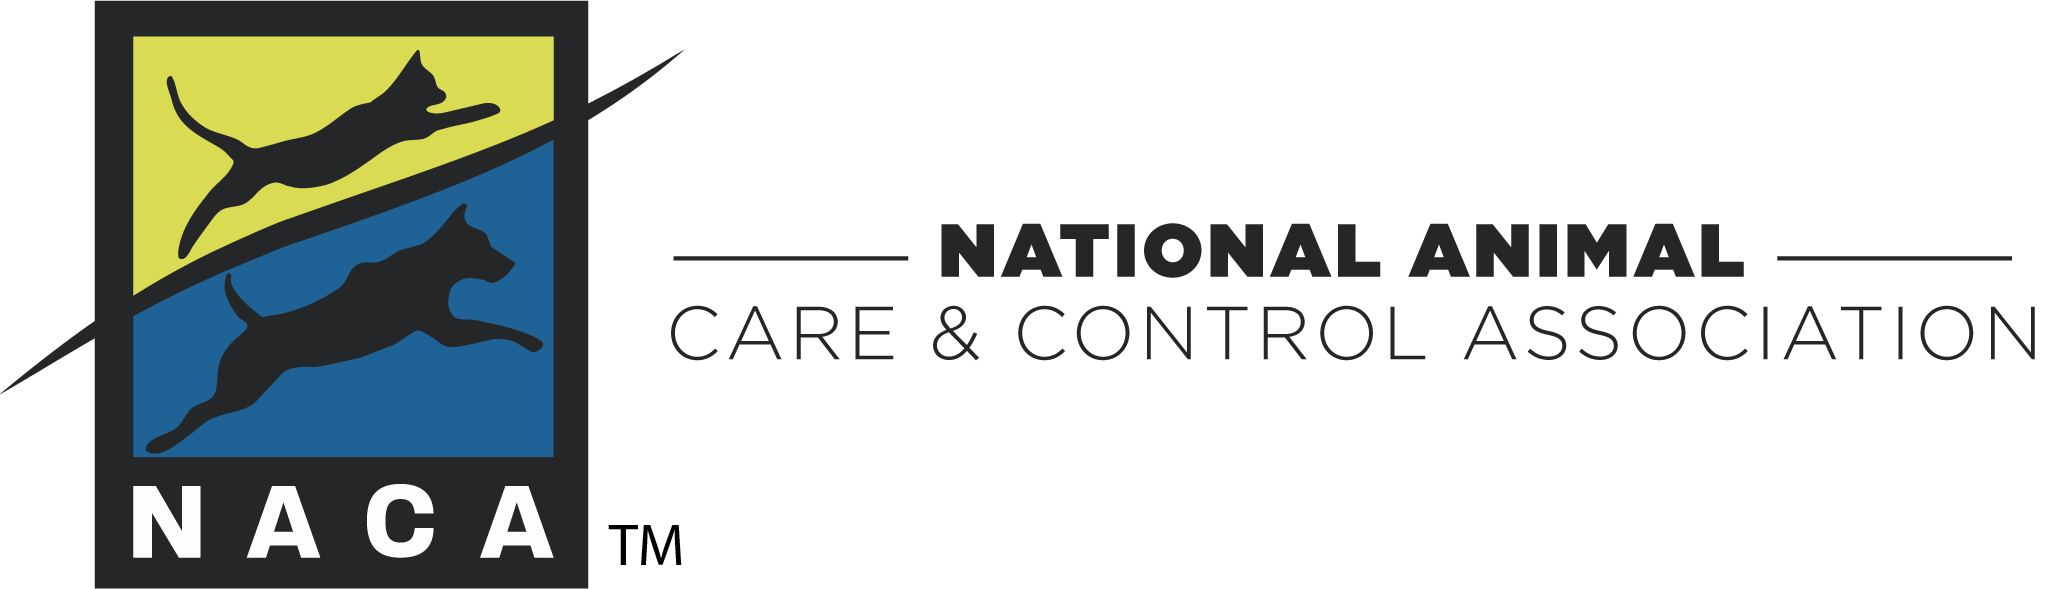 National Animal Care & Control Association | Welcome to NACA's Online  Community!